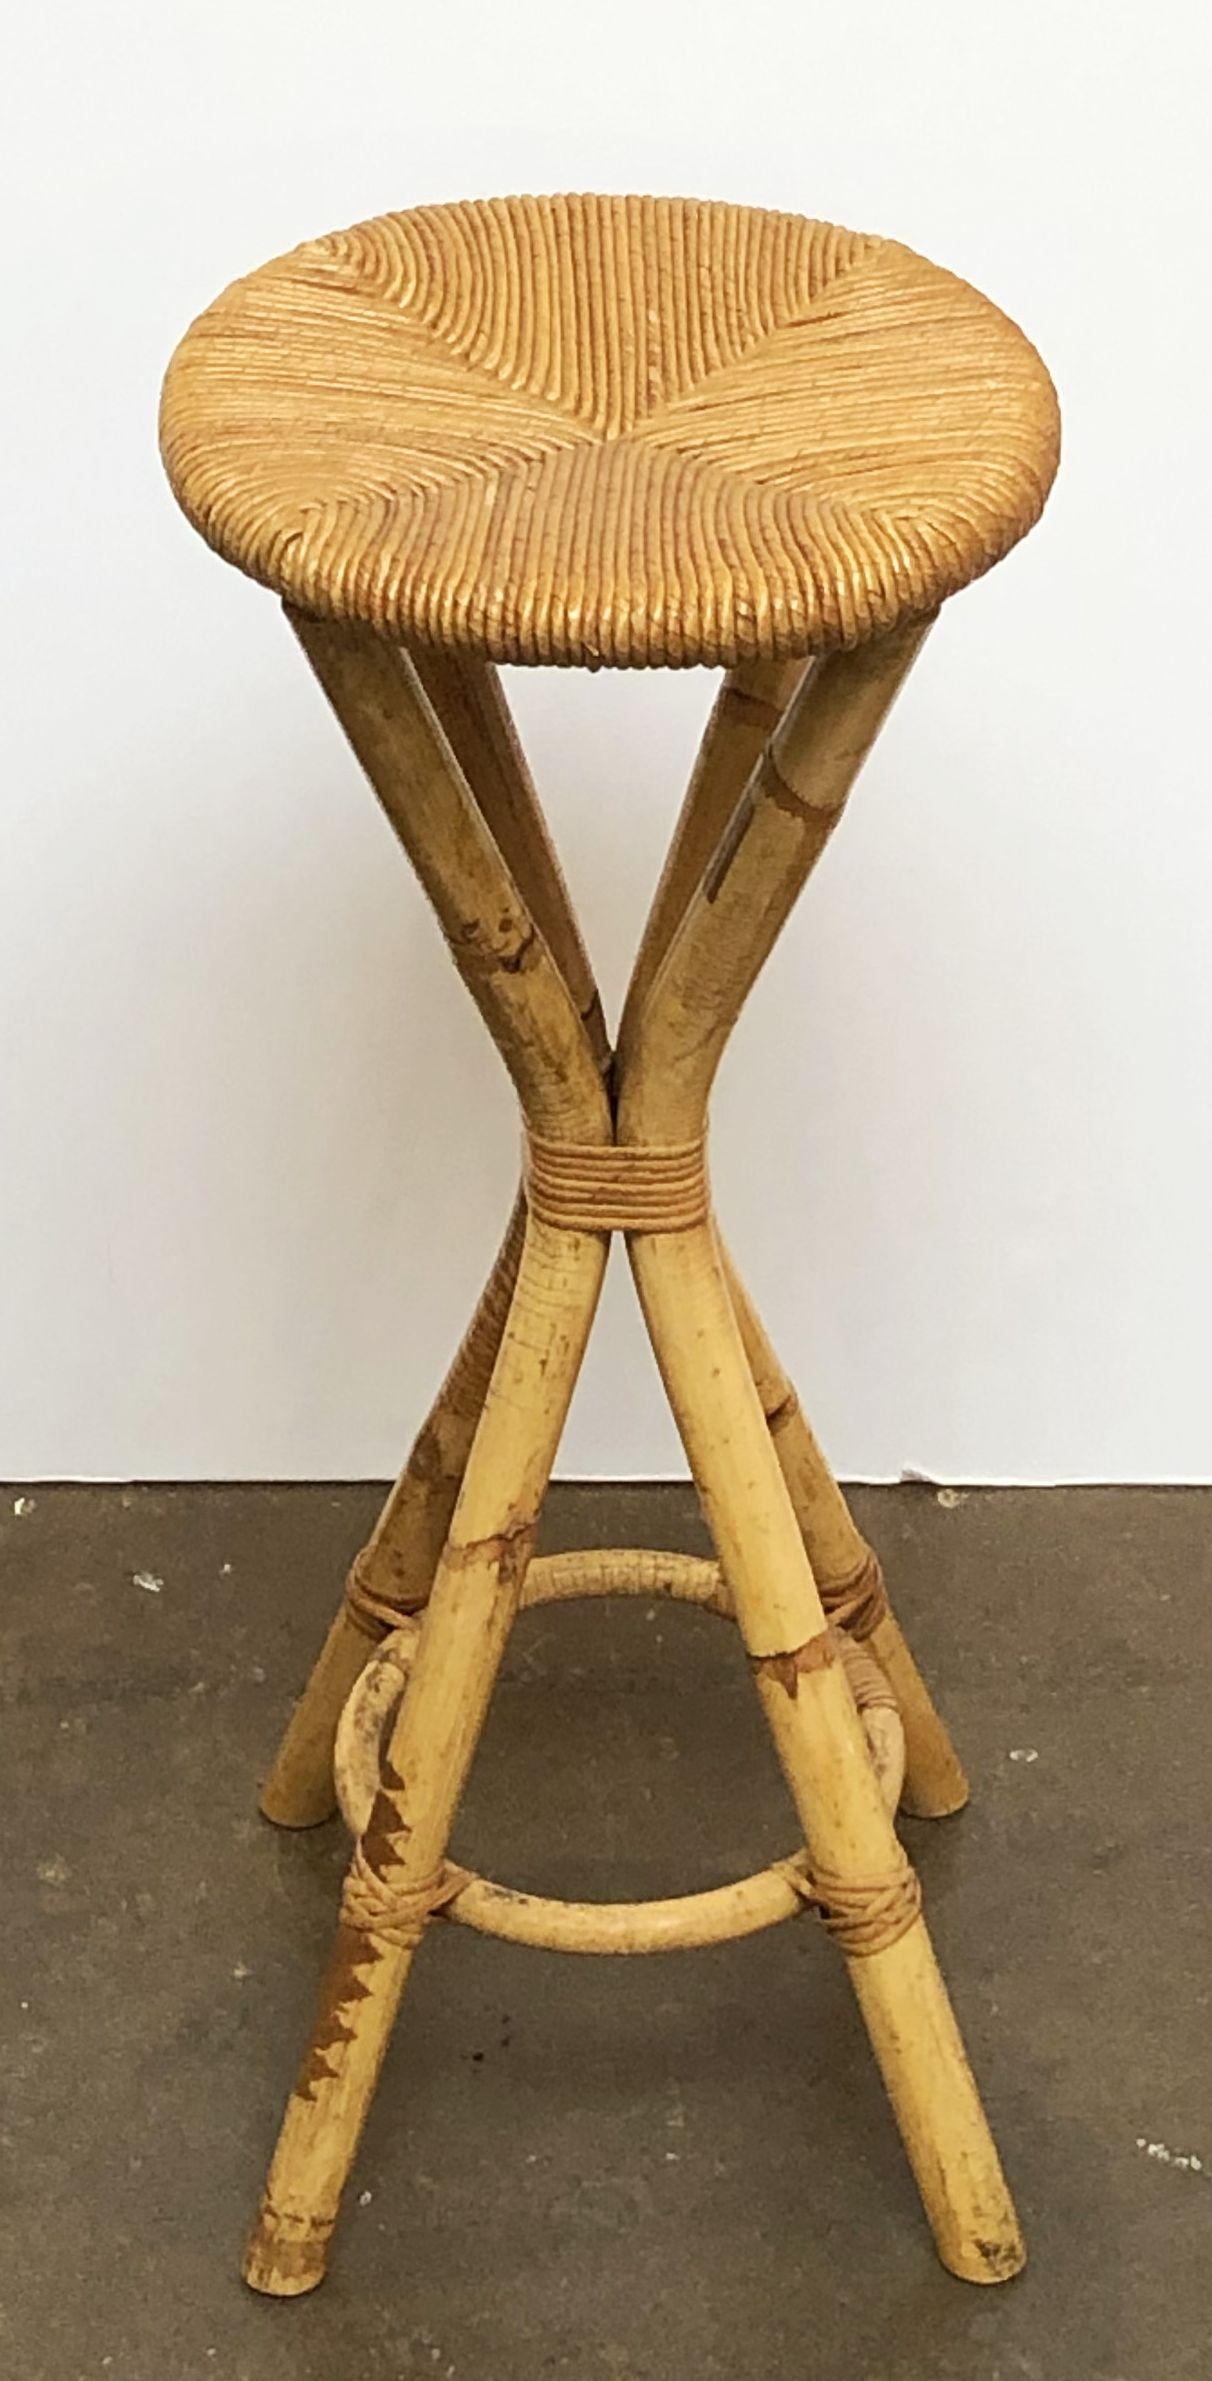 A fine French mid-century bar or seating stool of rattan with a woven rush seat by Le Rotin.